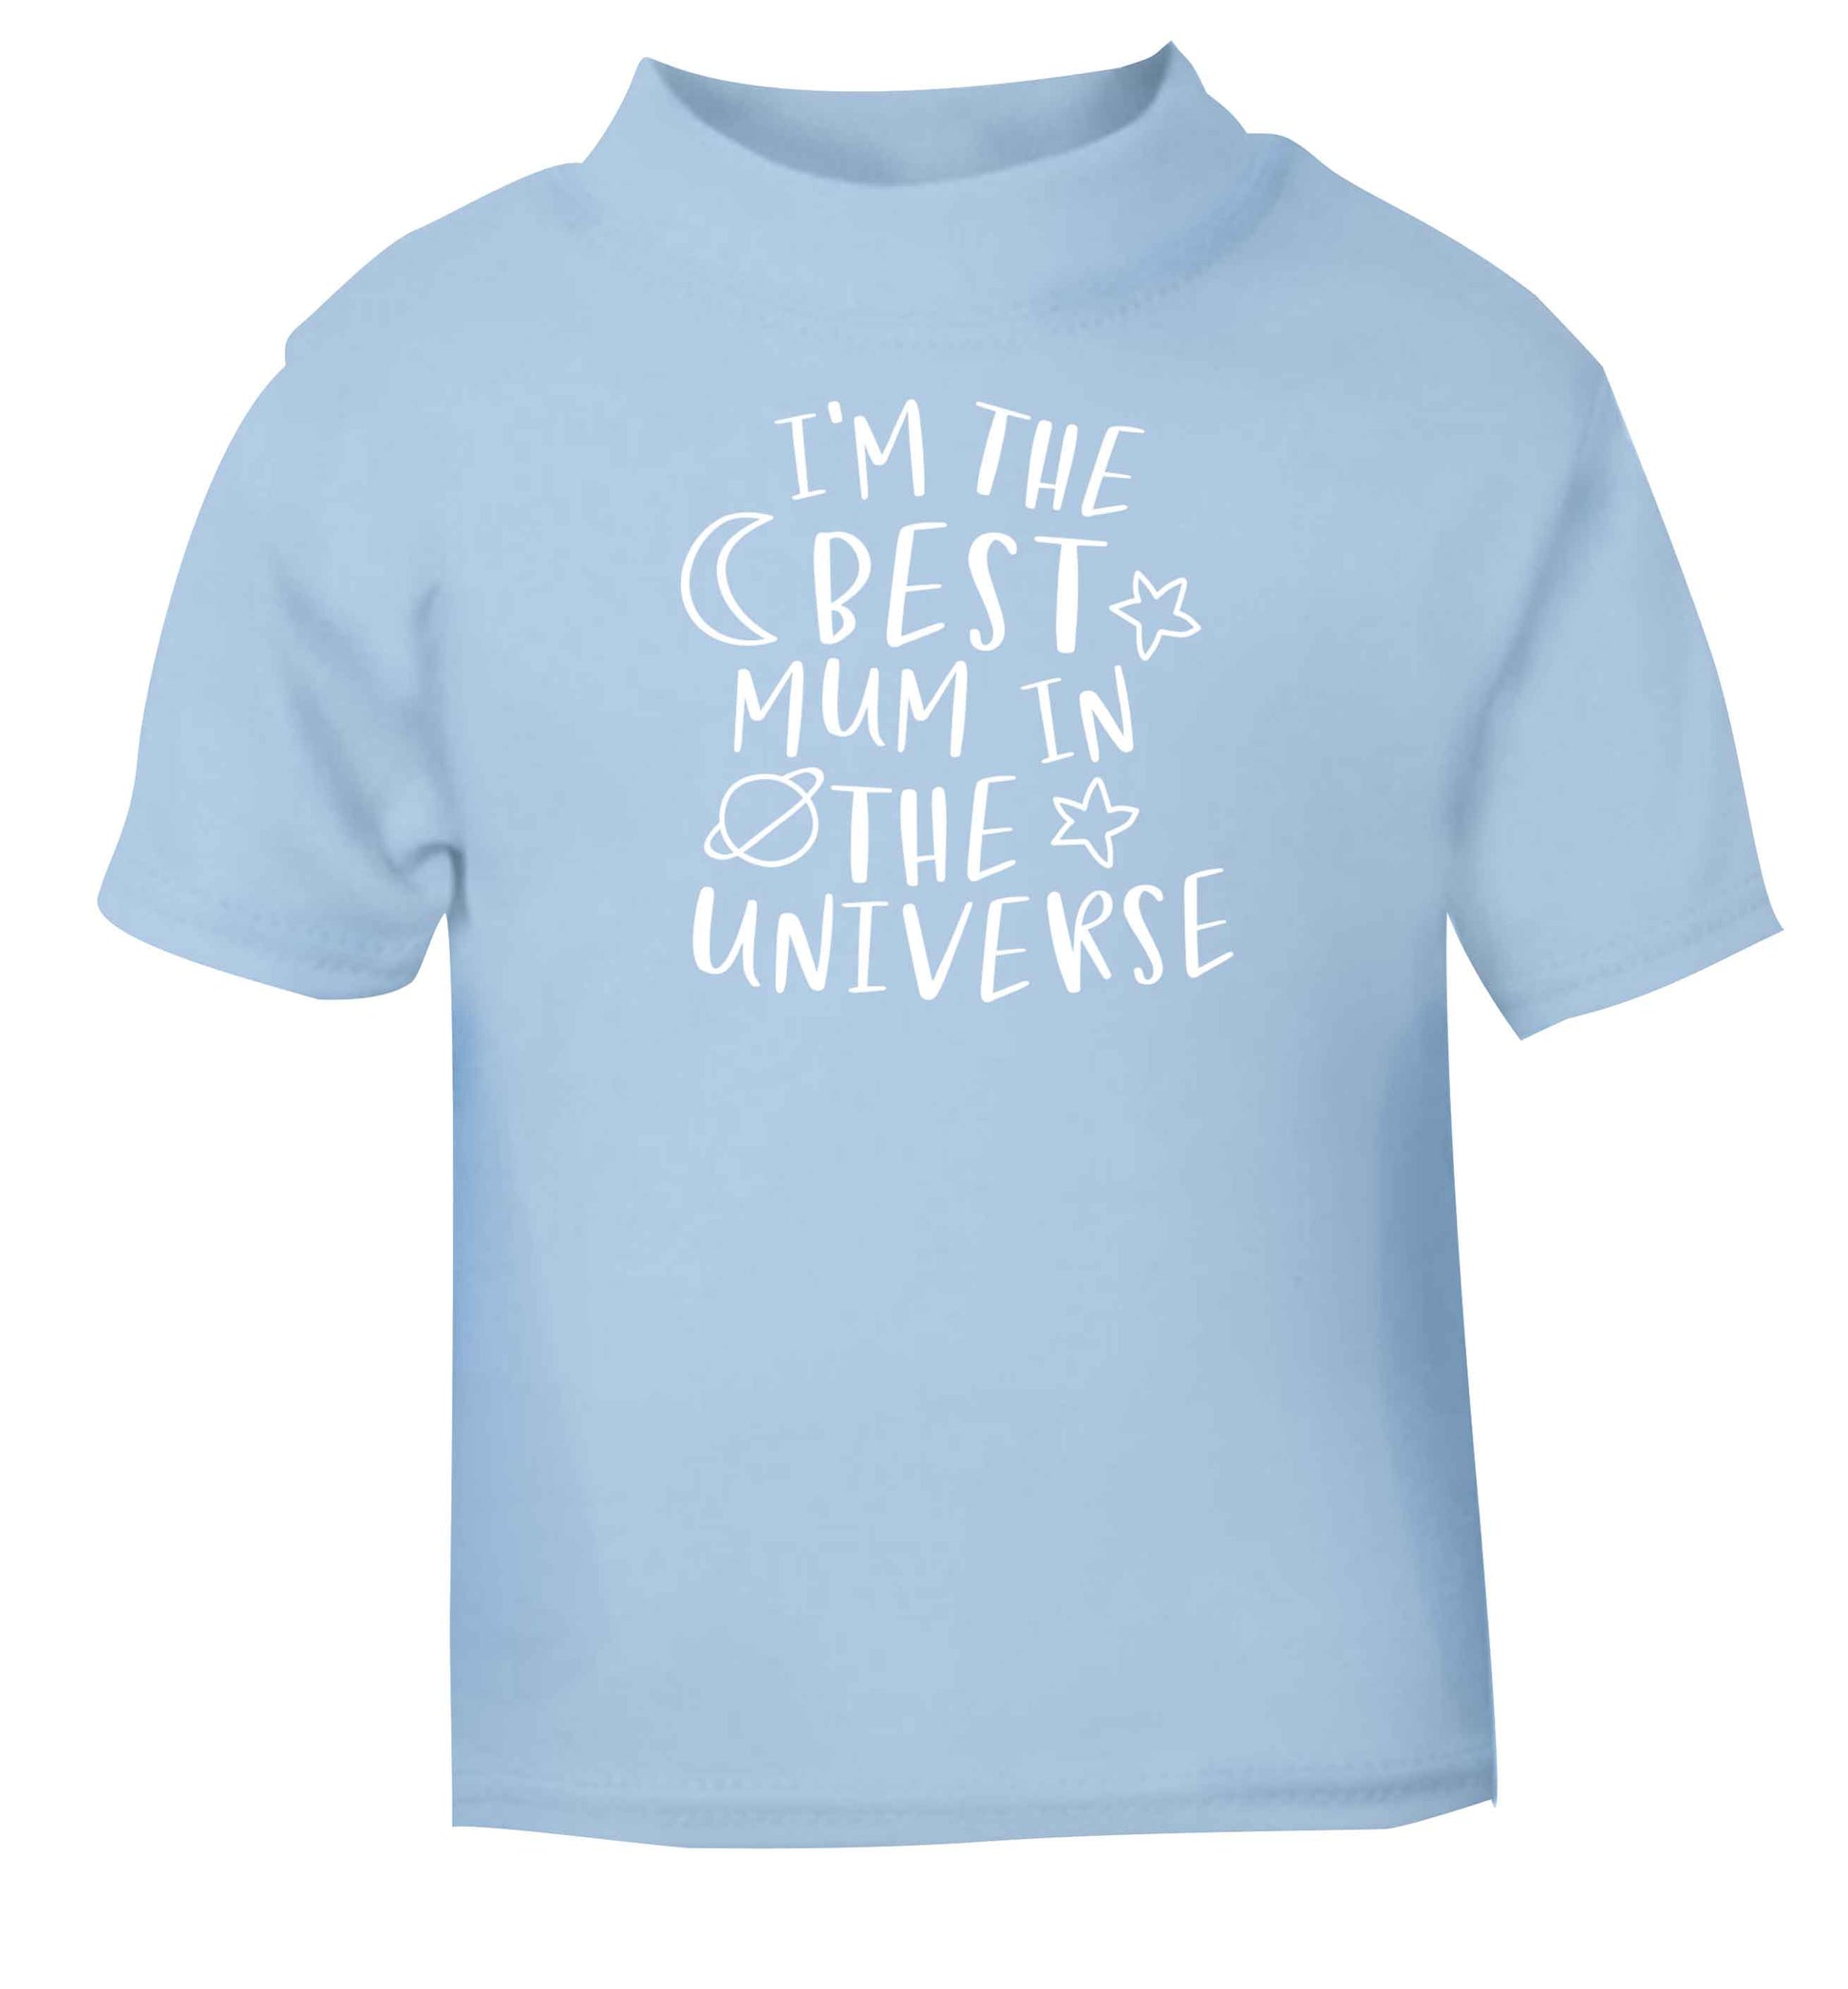 I'm the best mum in the universe light blue baby toddler Tshirt 2 Years